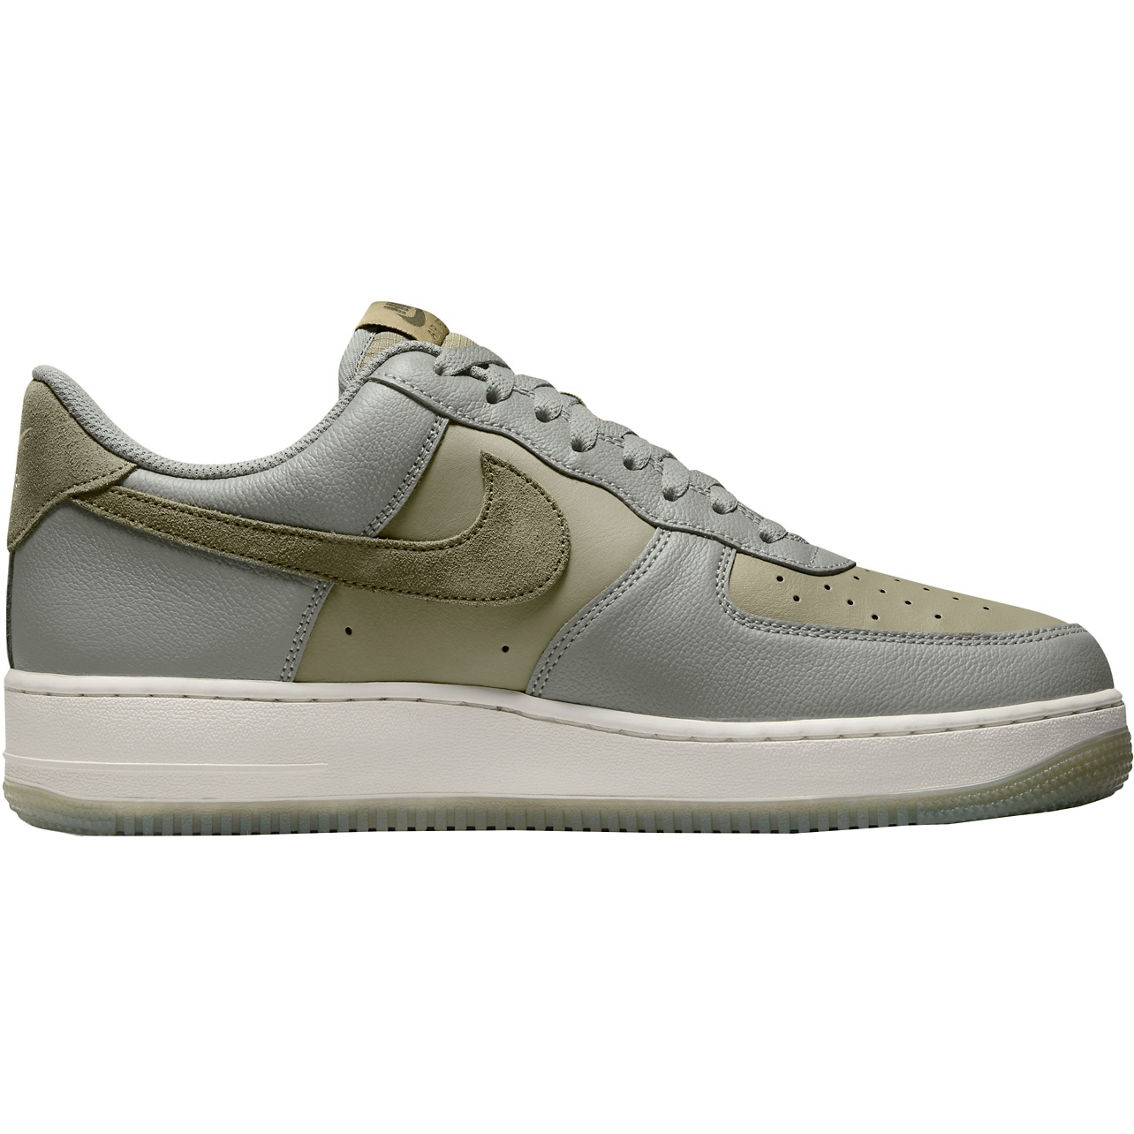 Nike Men's Air Force 1 07 LV8 Shoes - Image 2 of 8